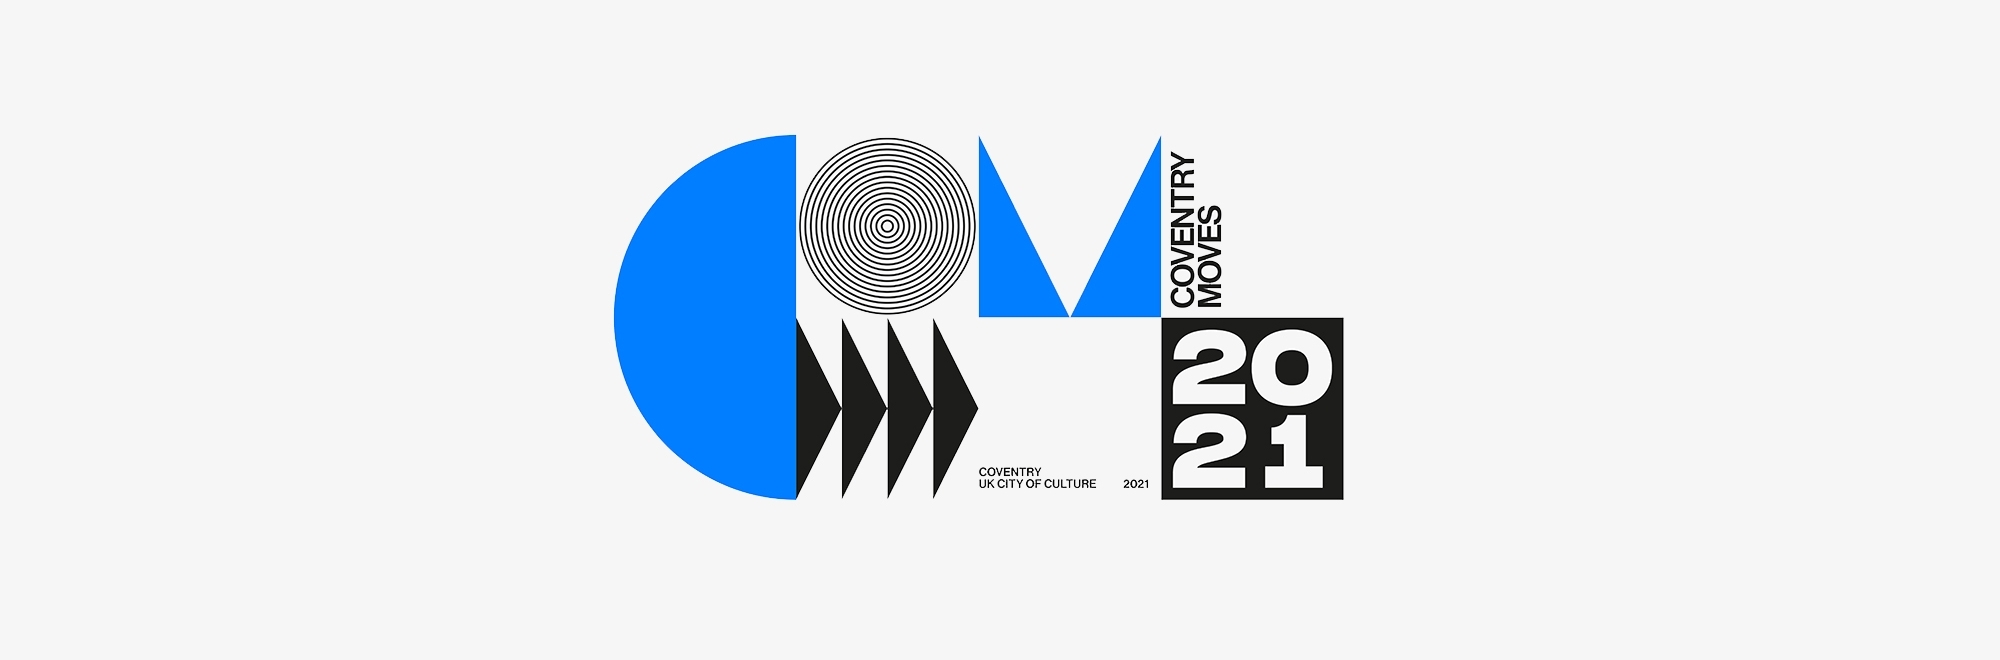 Uncommon creates new identity for Coventry City of Culture 2021 inspired by brutalist and modernist architecture